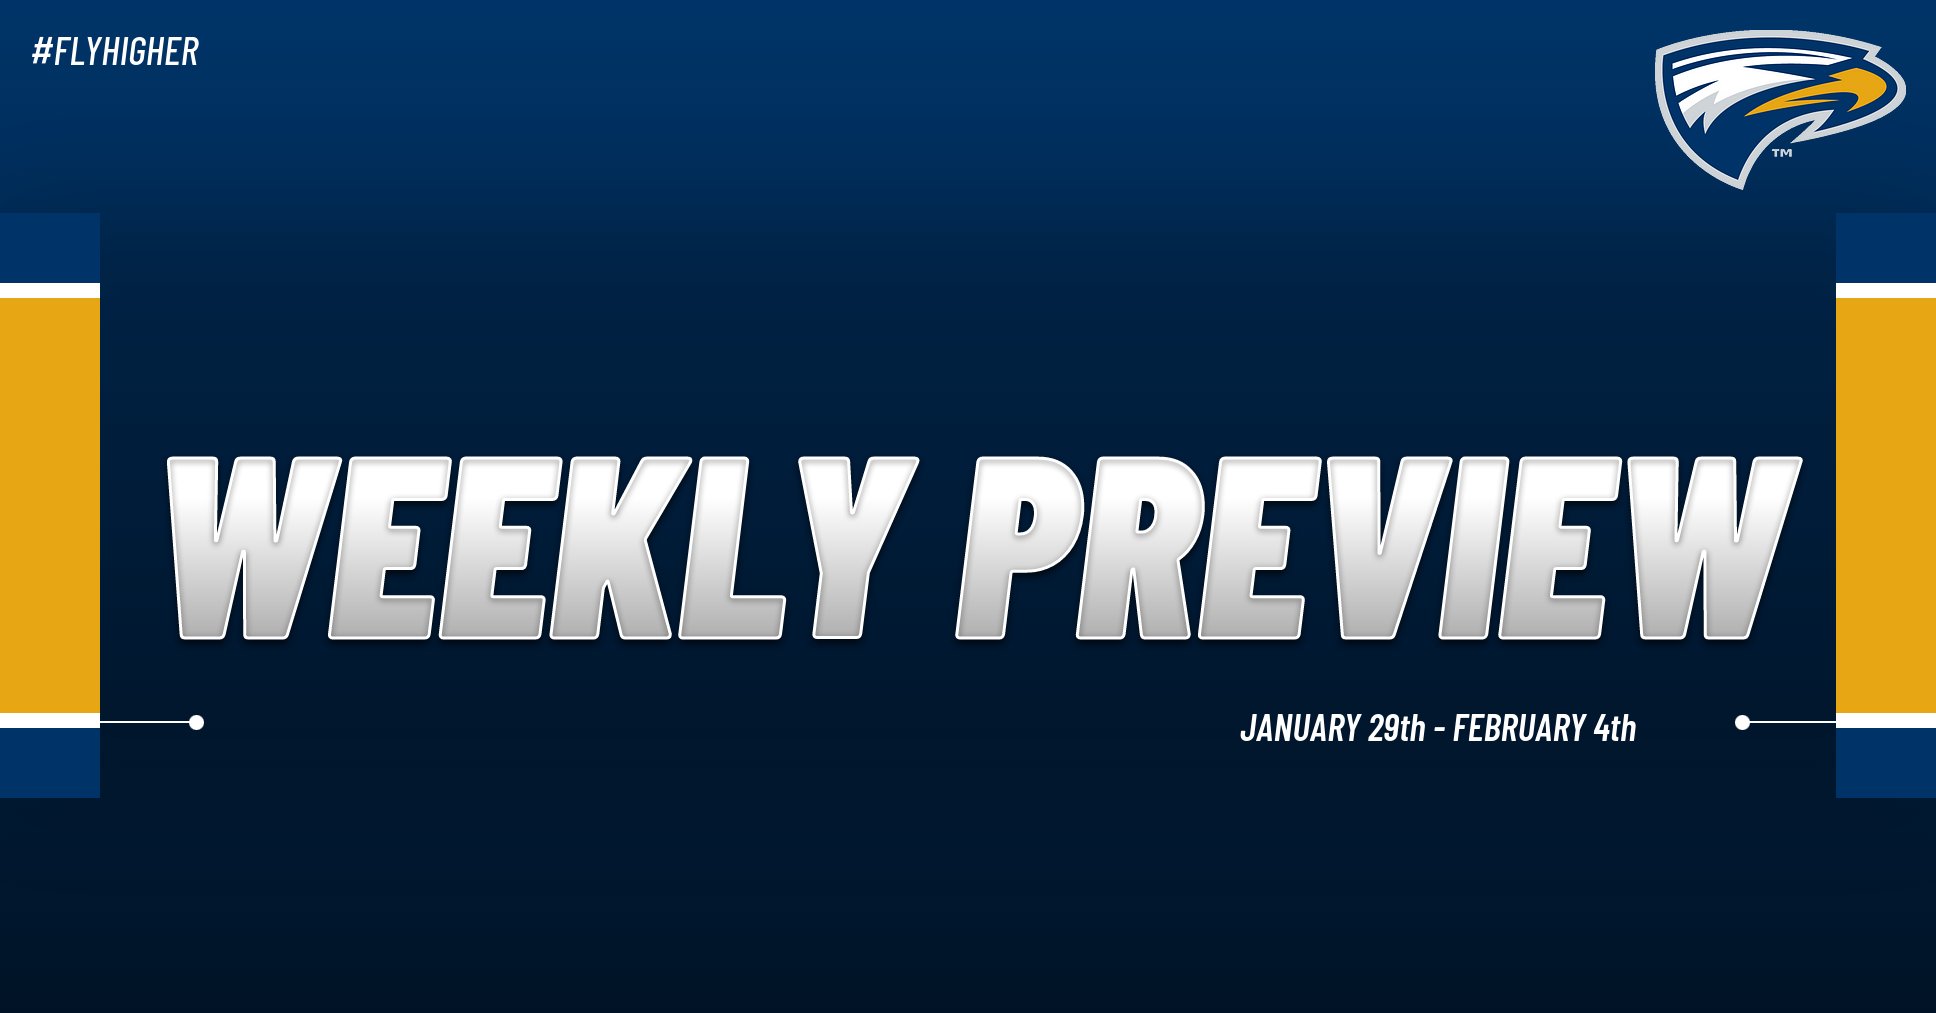 Emory Athletics Weekly Preview: January 29th - February 4th